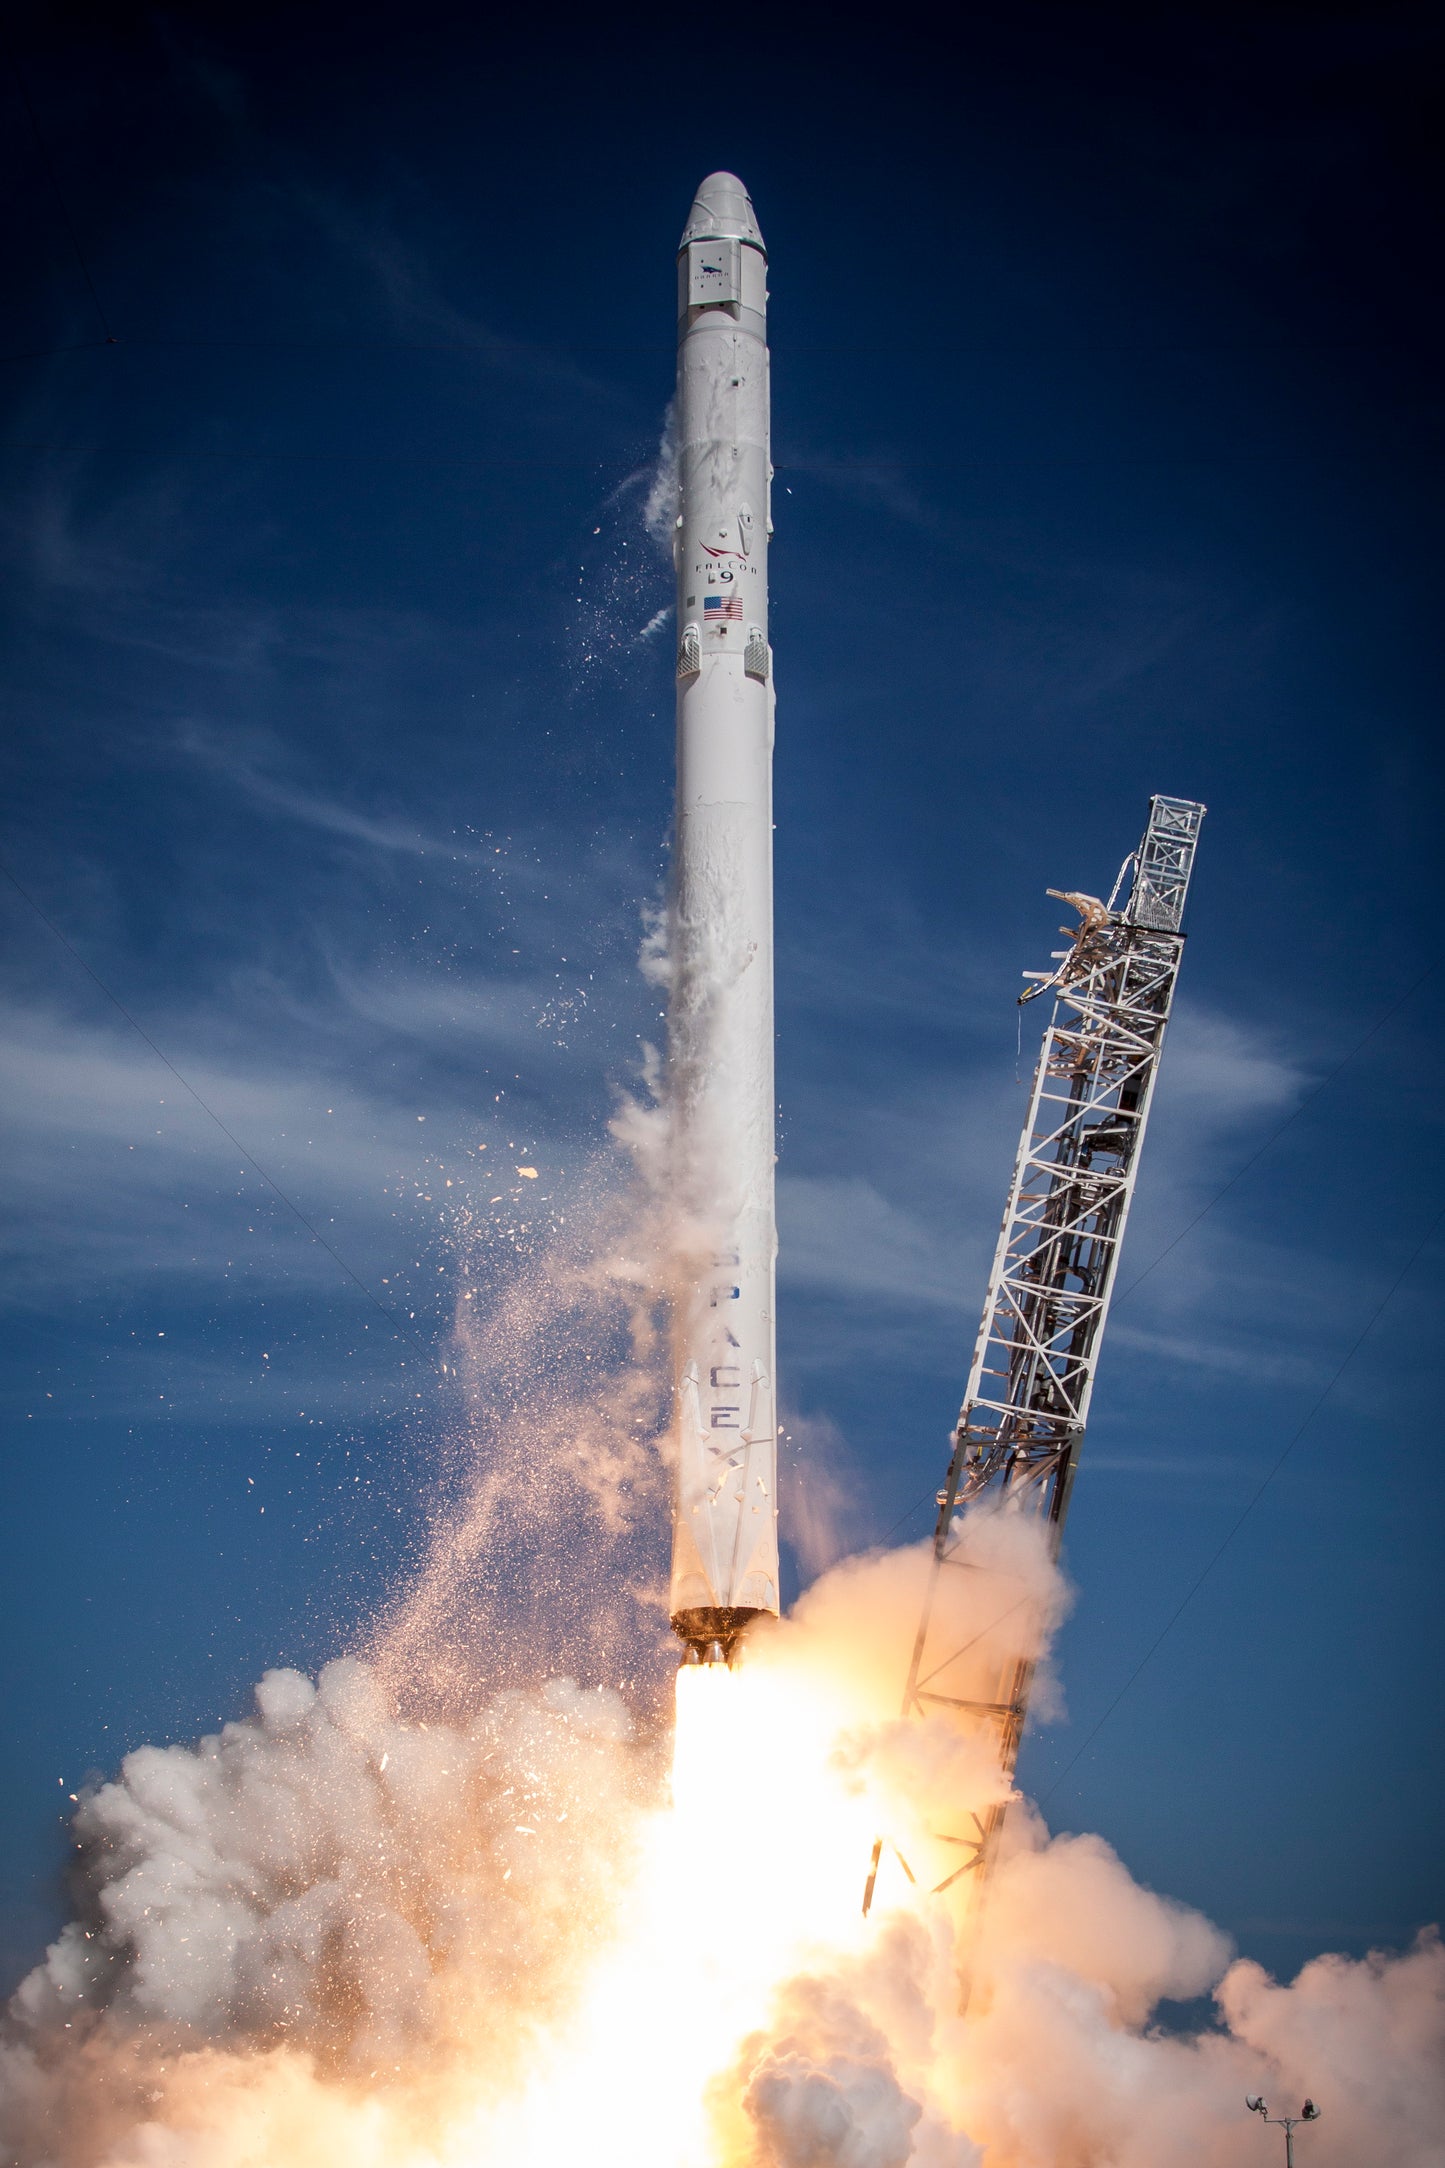 SPACE X FALCON 9 ROCKET LAUNCH GLOSSY POSTER PICTURE PHOTO PRINT BANNER